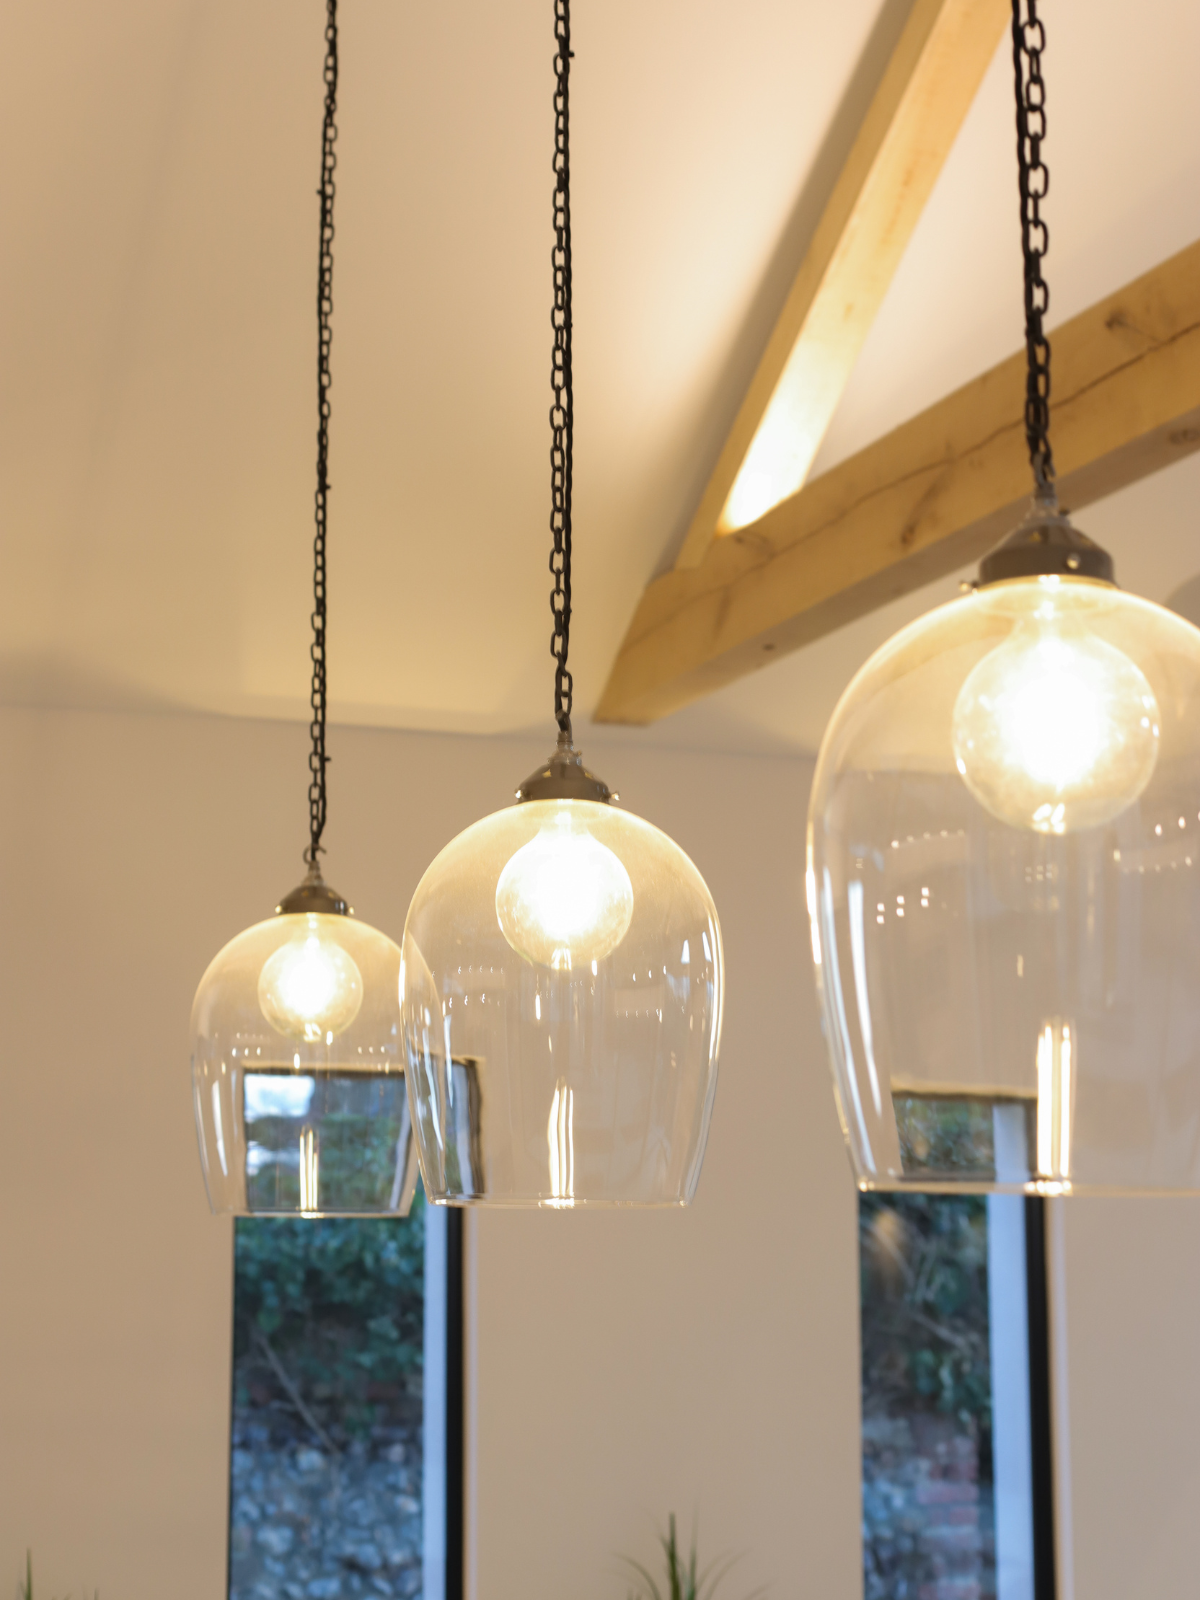 Three lighting pendants hanging from the ceiling